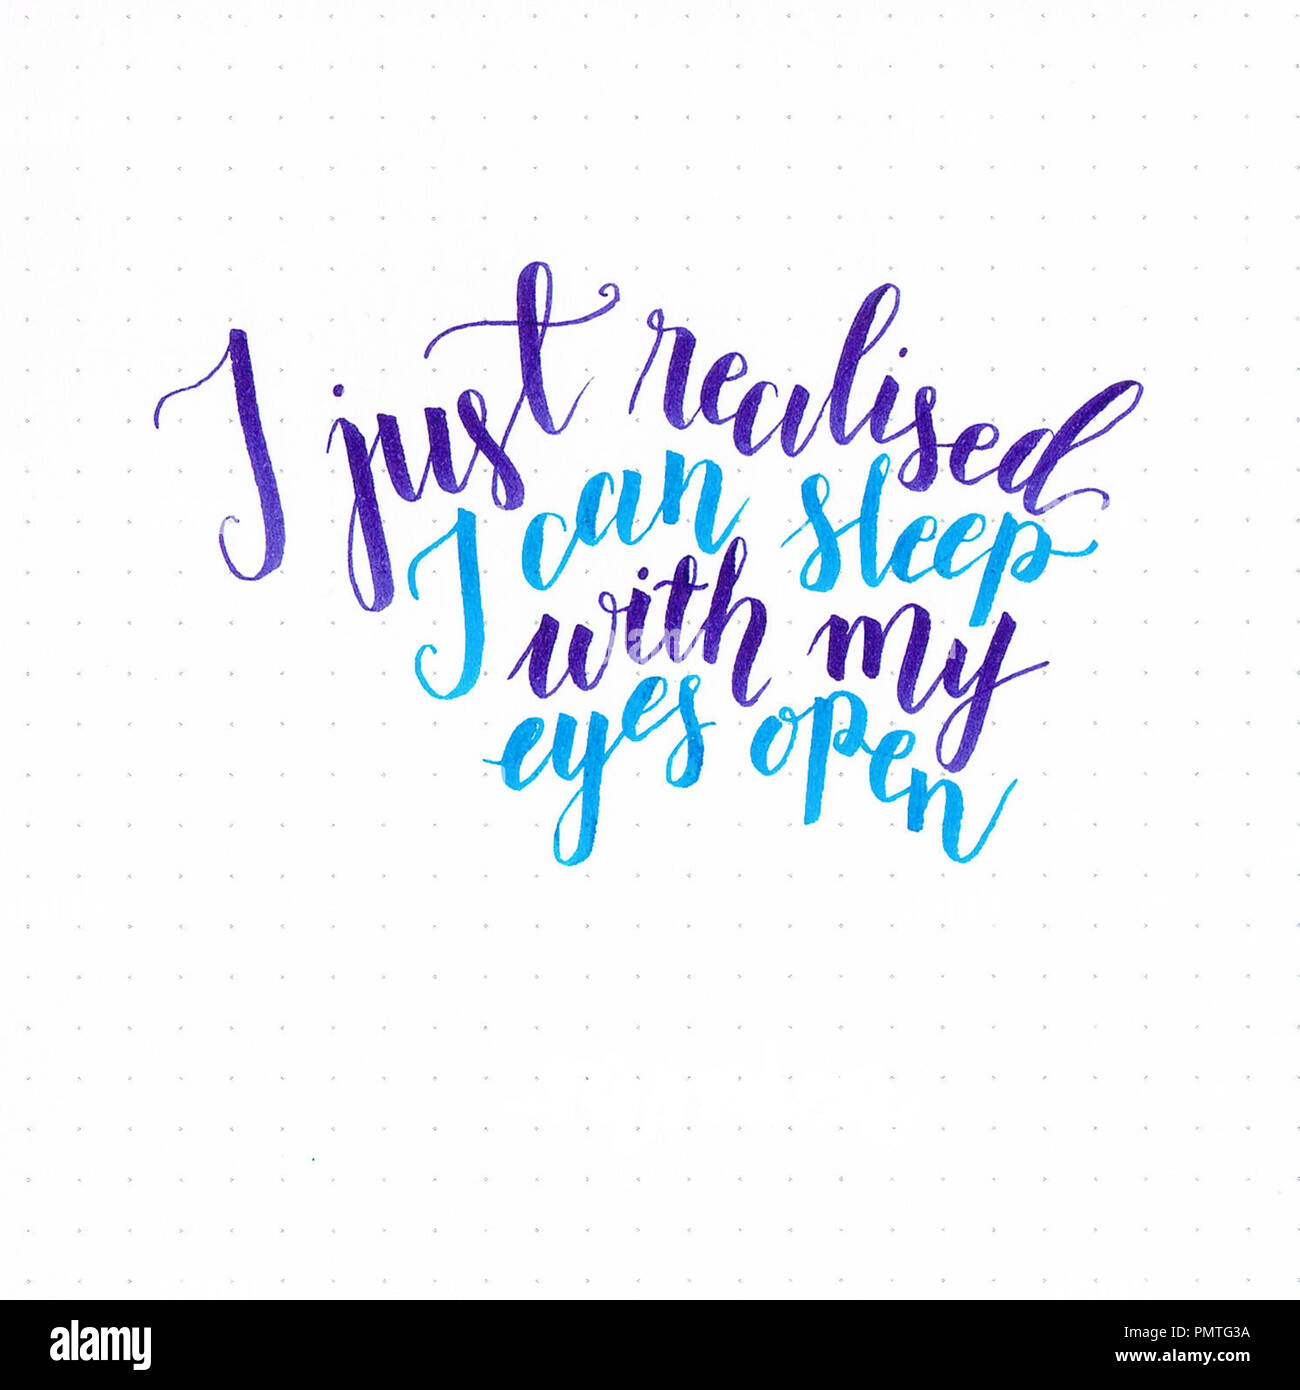 'I just realised I can sleep with my eyes open' hand lettering design in purple and blue with flourishes Stock Photo